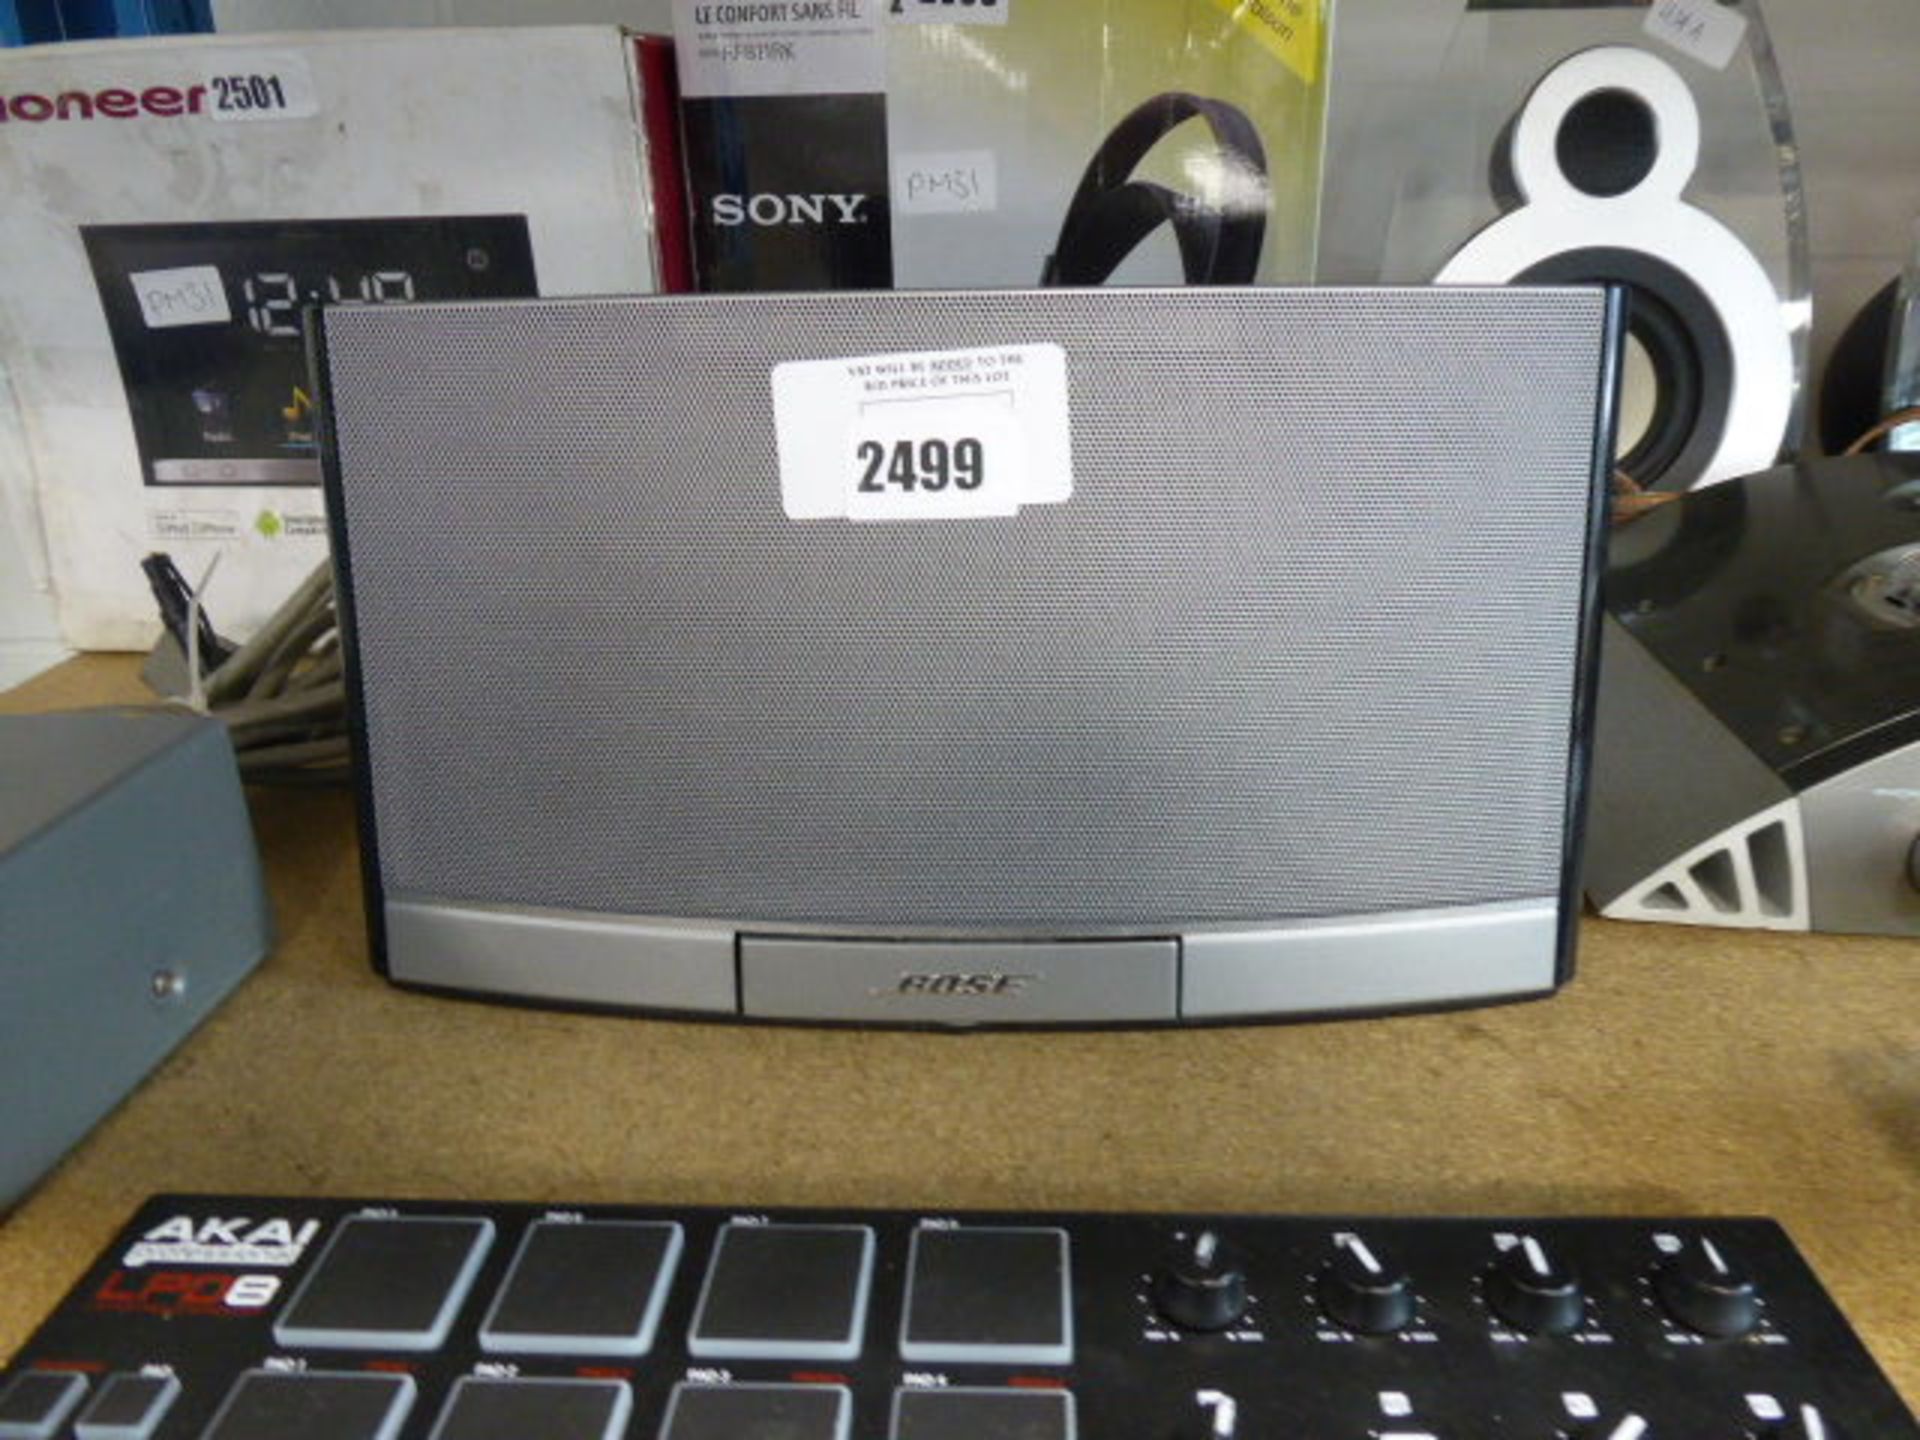 2593 Bose sound dock portable digital music system with no power supply